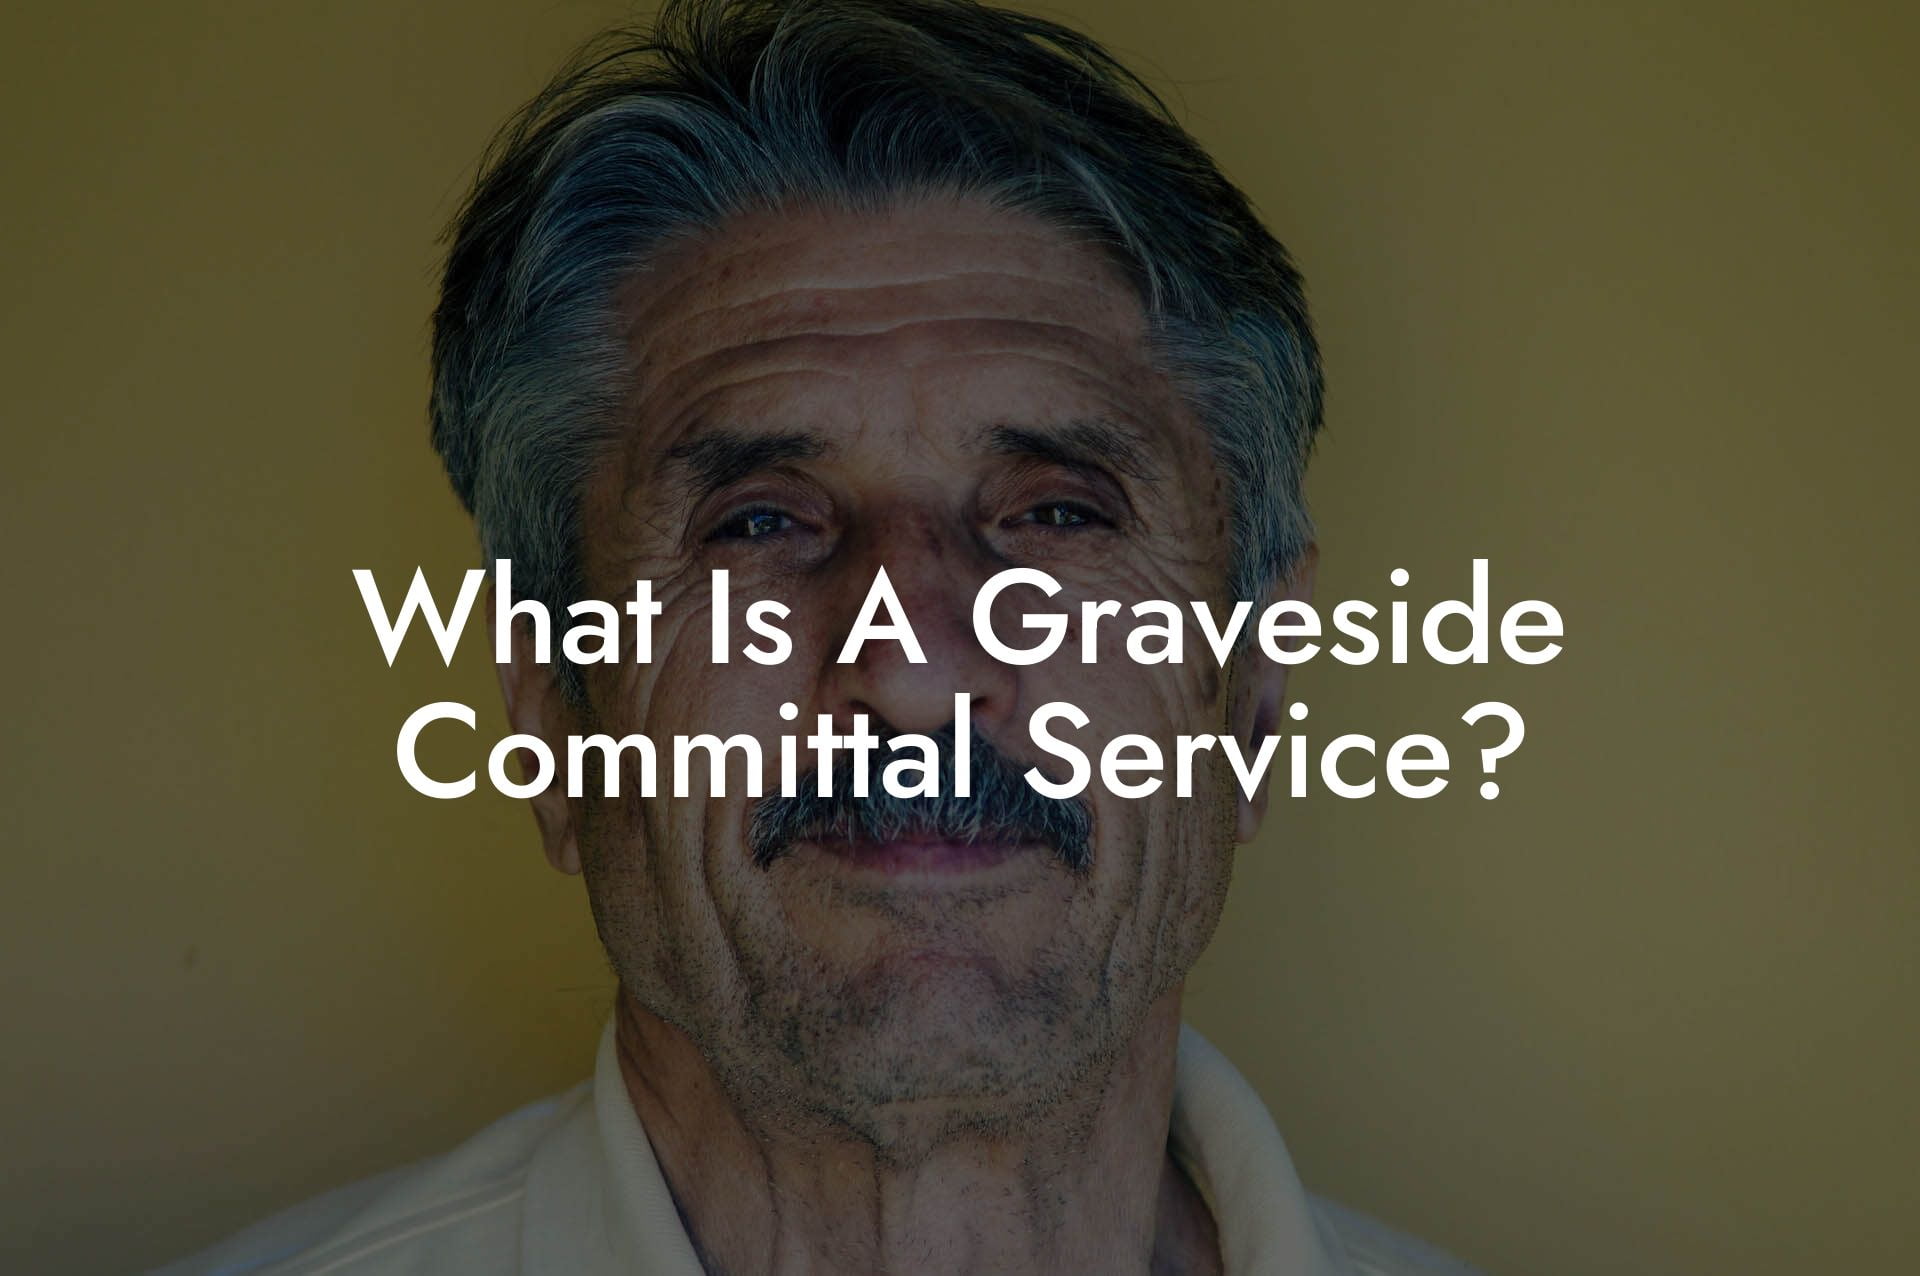 What Is A Graveside Committal Service?